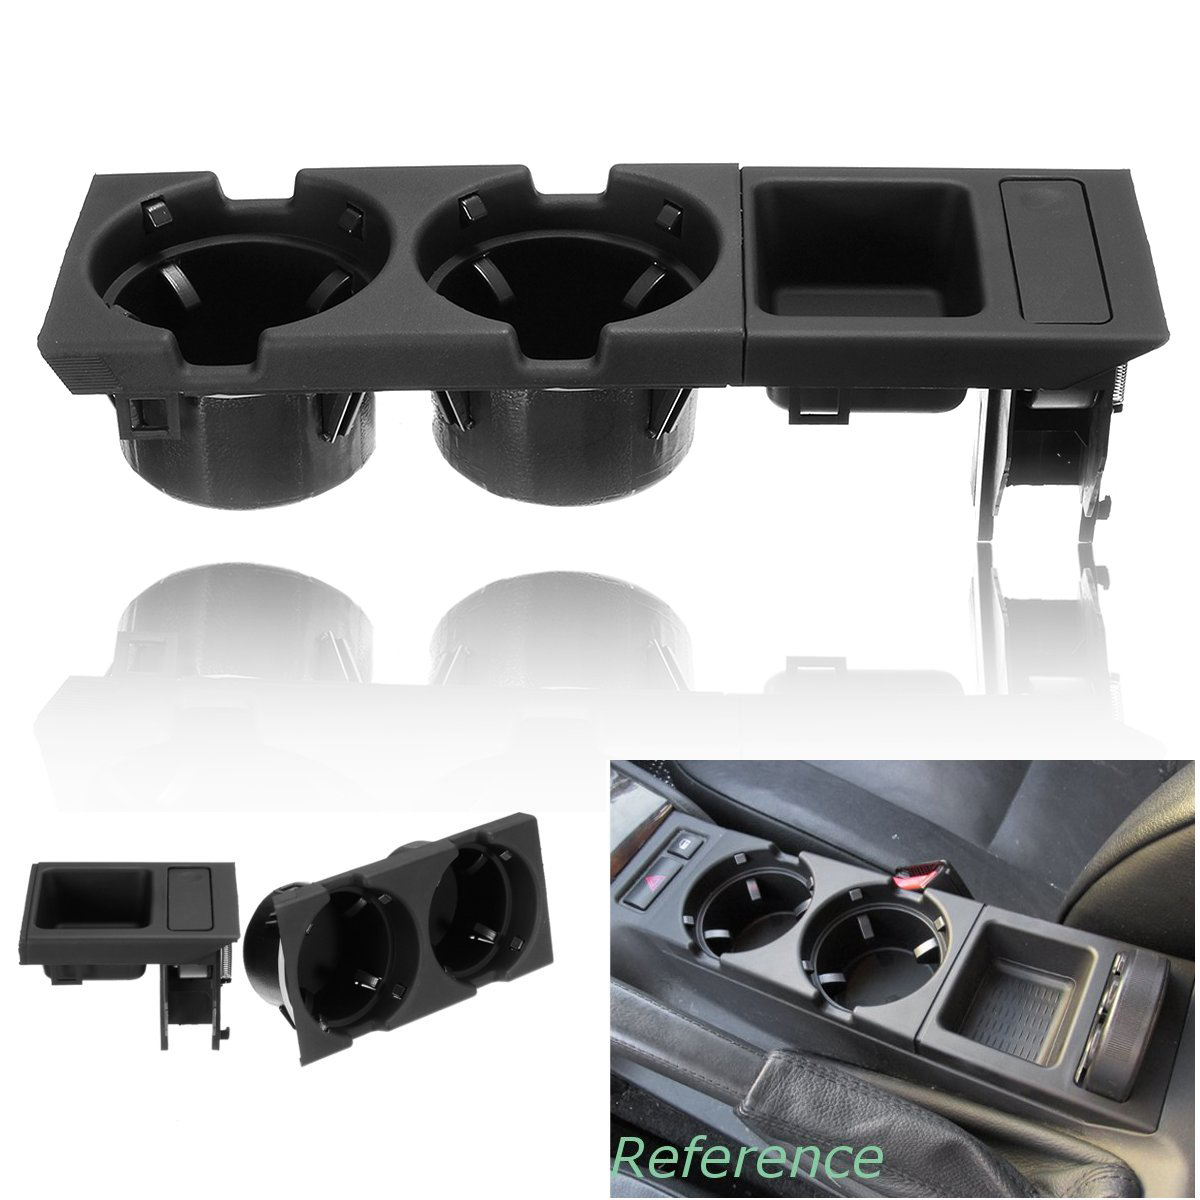 3Pcs Car Center Console Water Cup Holder Beverage Bottle Holder Coin Tray Saddle Frame for Bmw 3 Series E46 318I 320I 98-06 5116